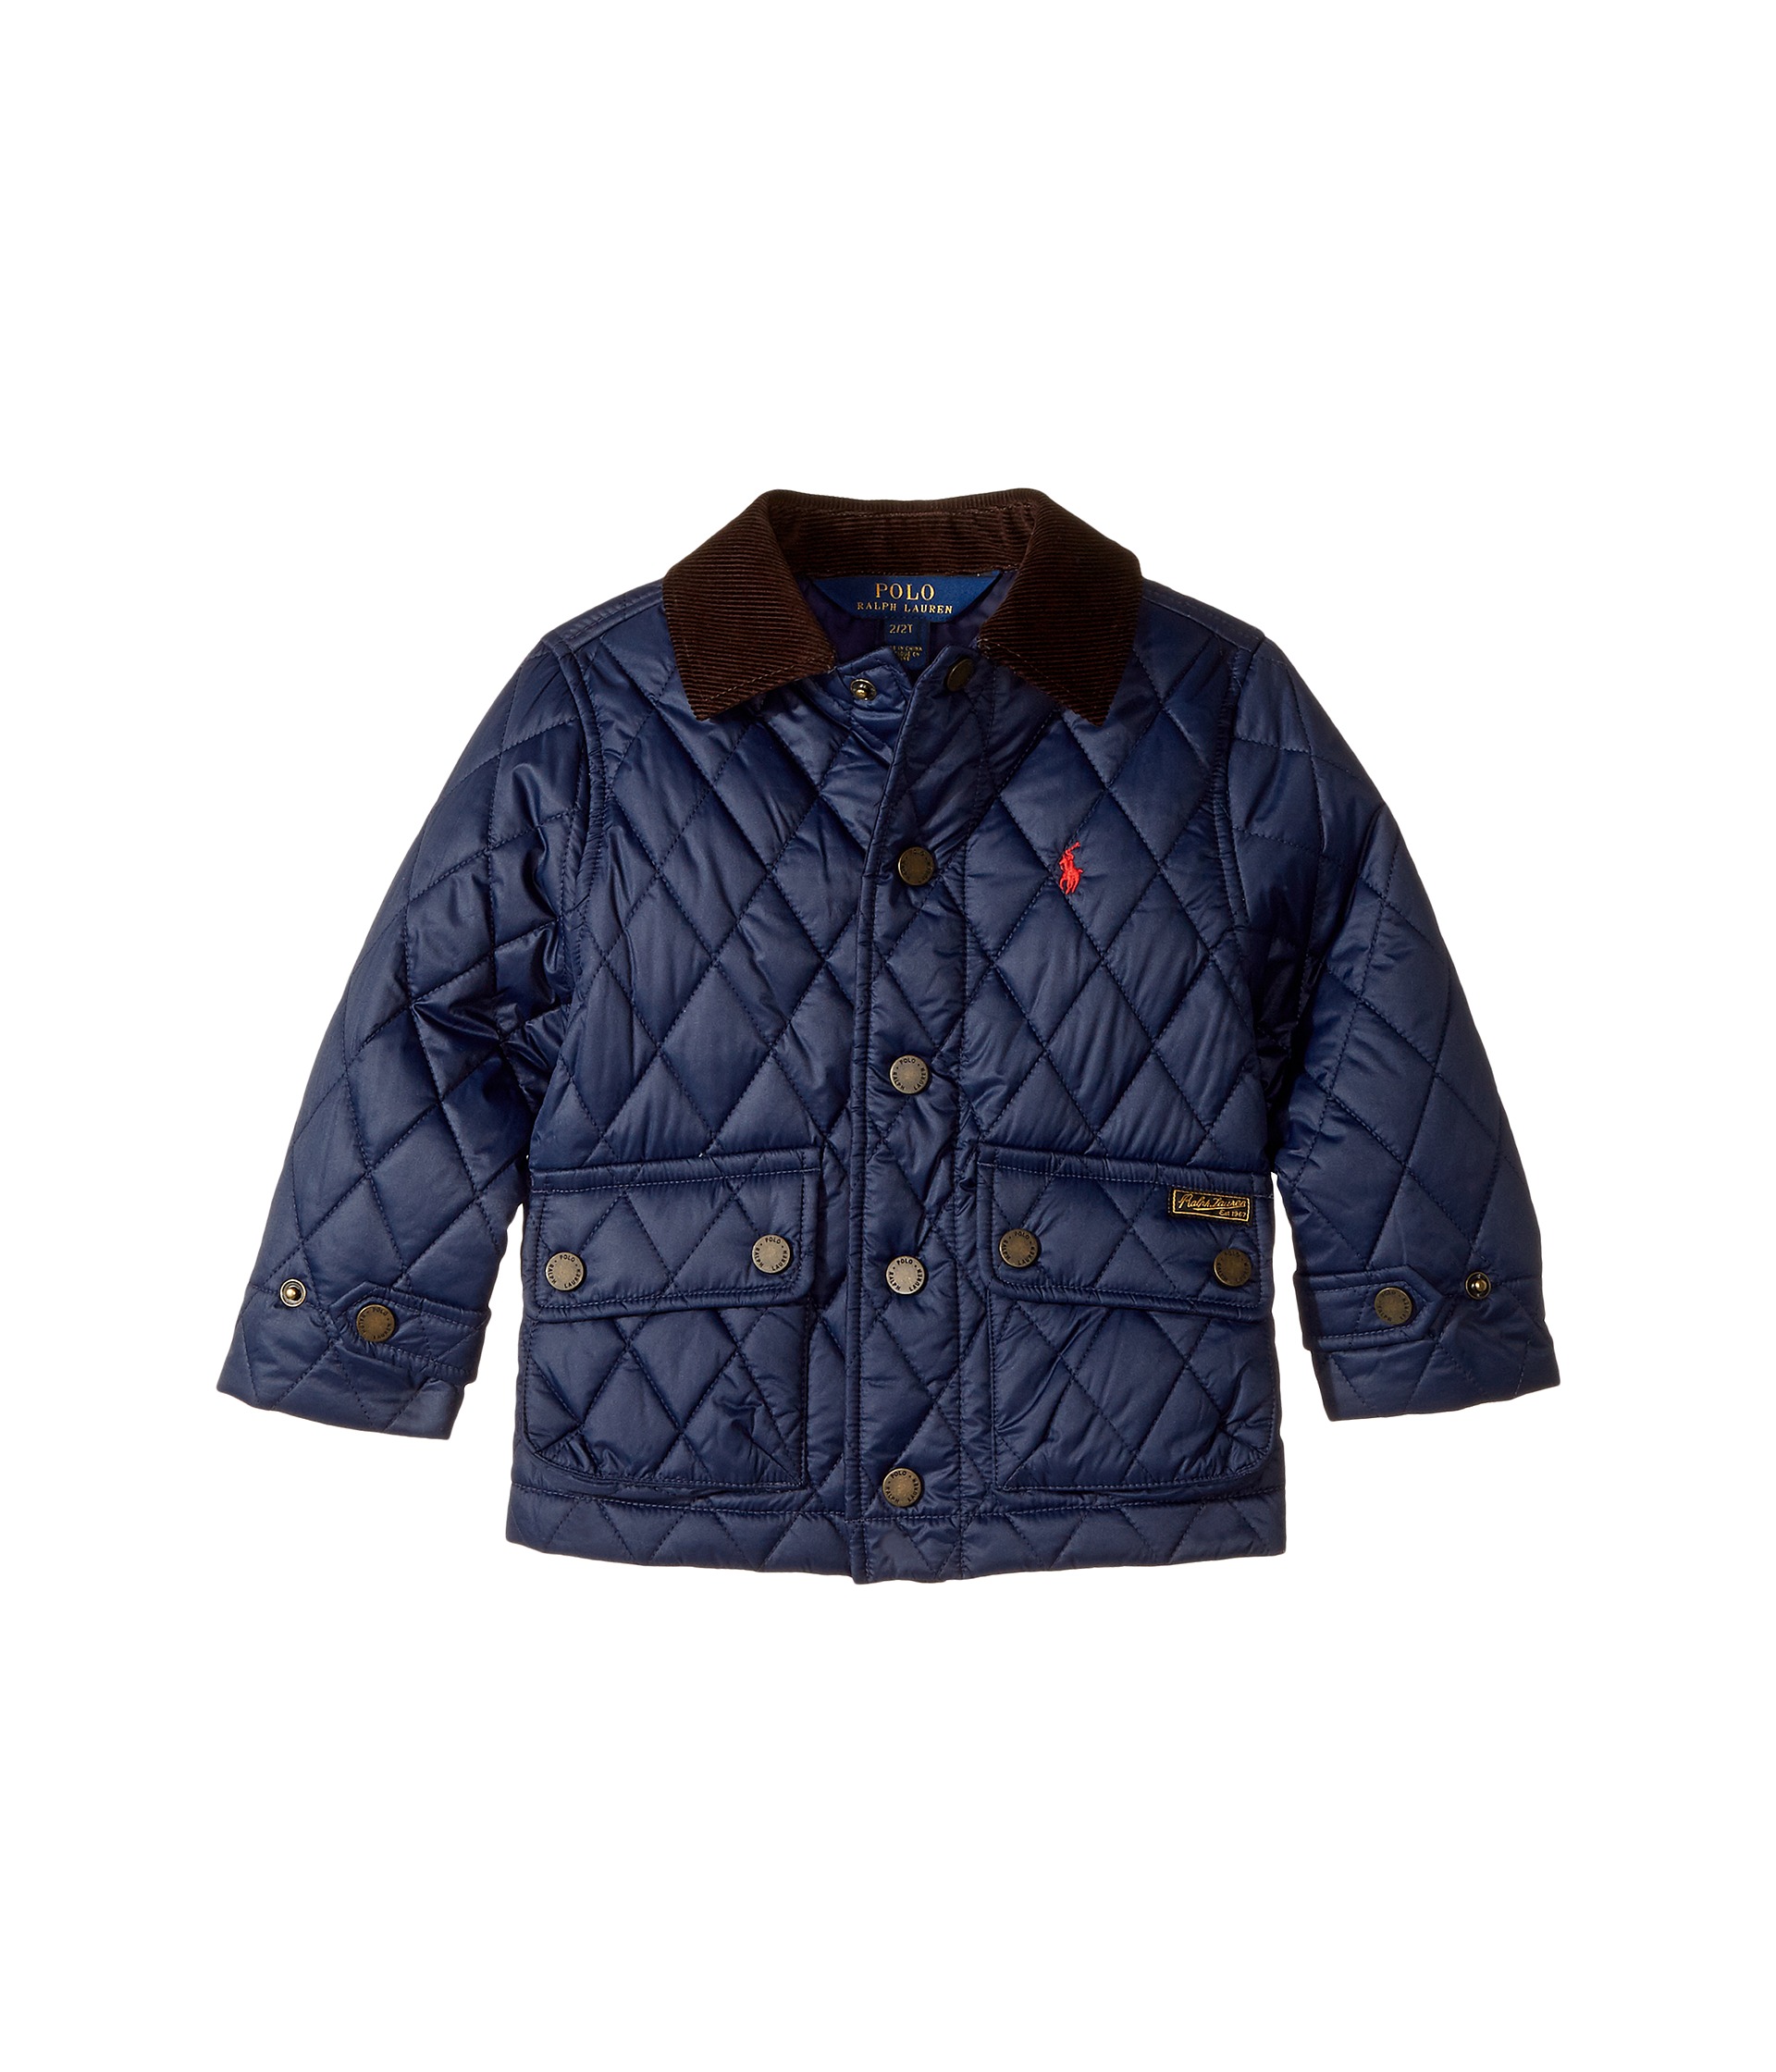 Polo Ralph Lauren Kids Quilted Barn Jacket (Toddler) at Zappos.com